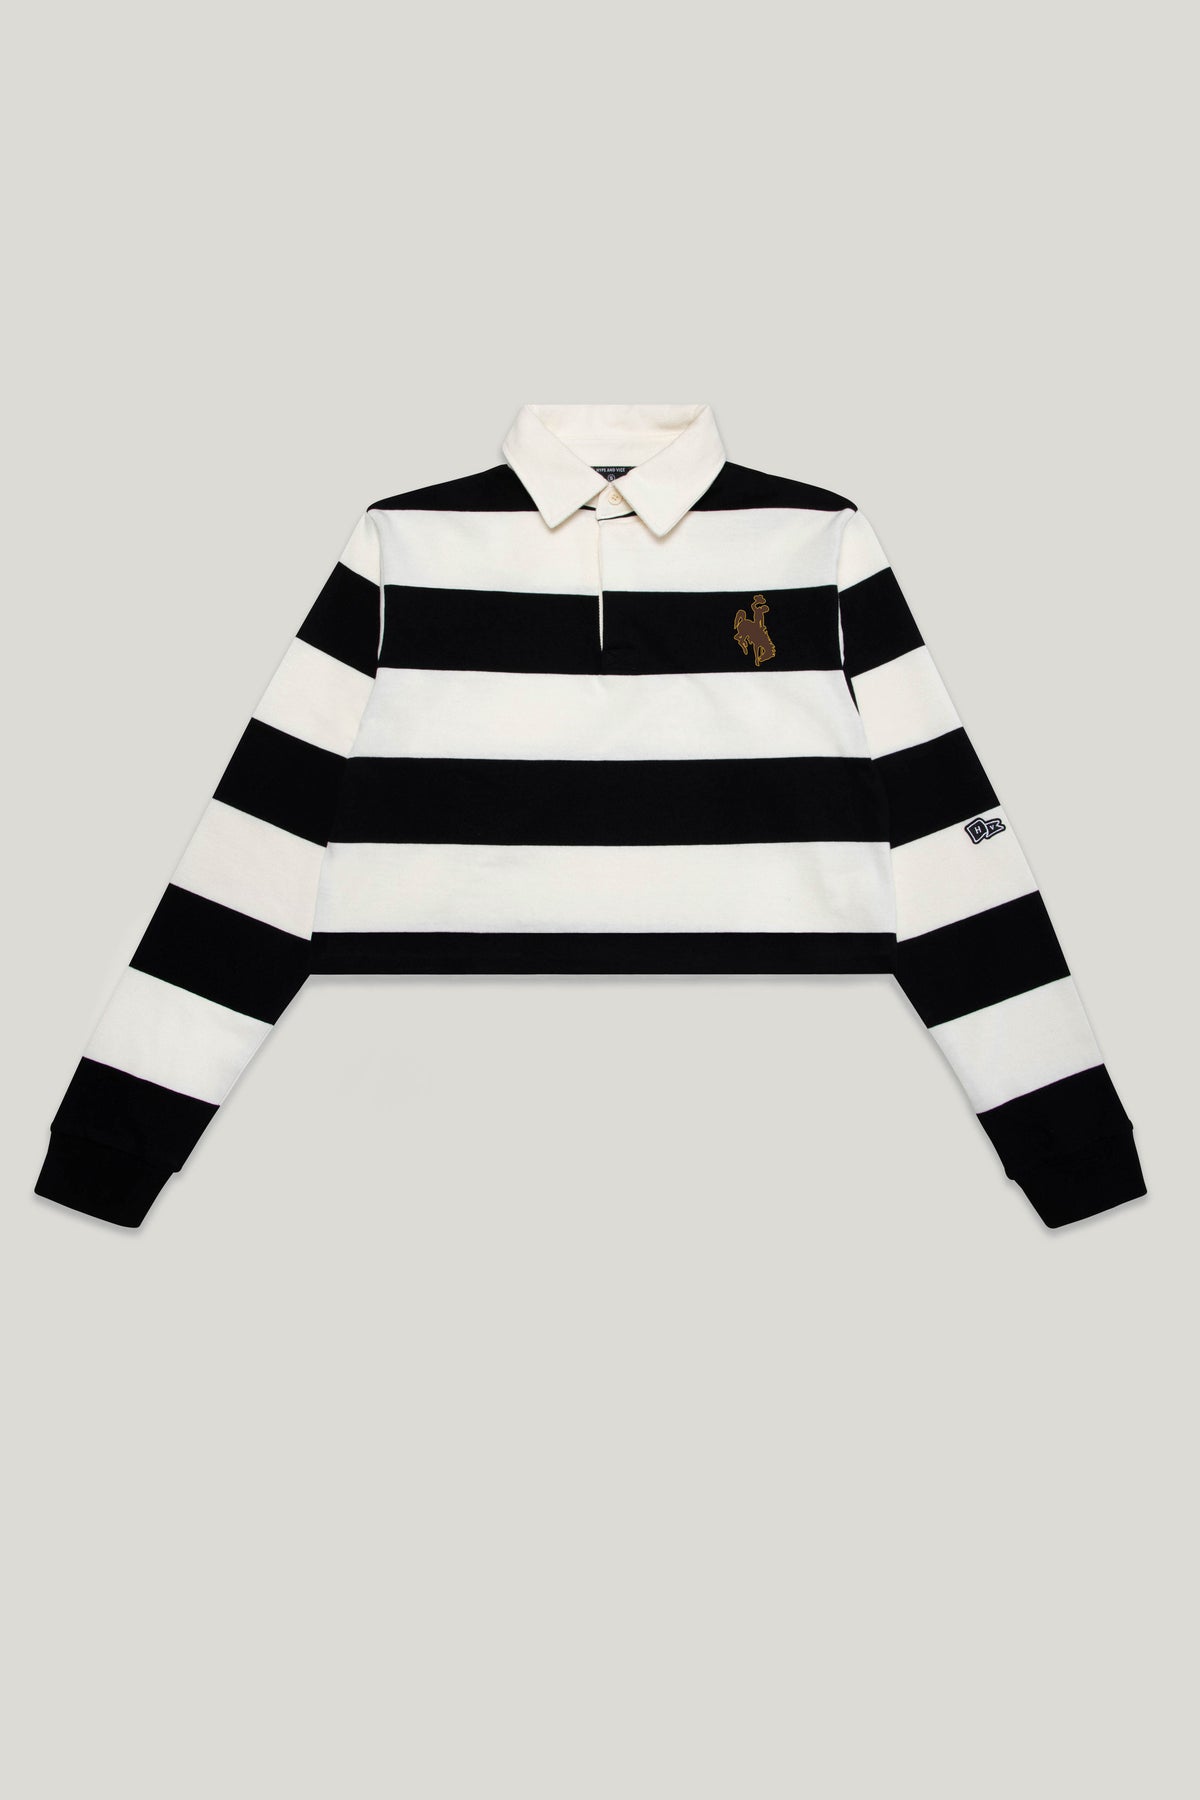 University of Wyoming Rugby Top